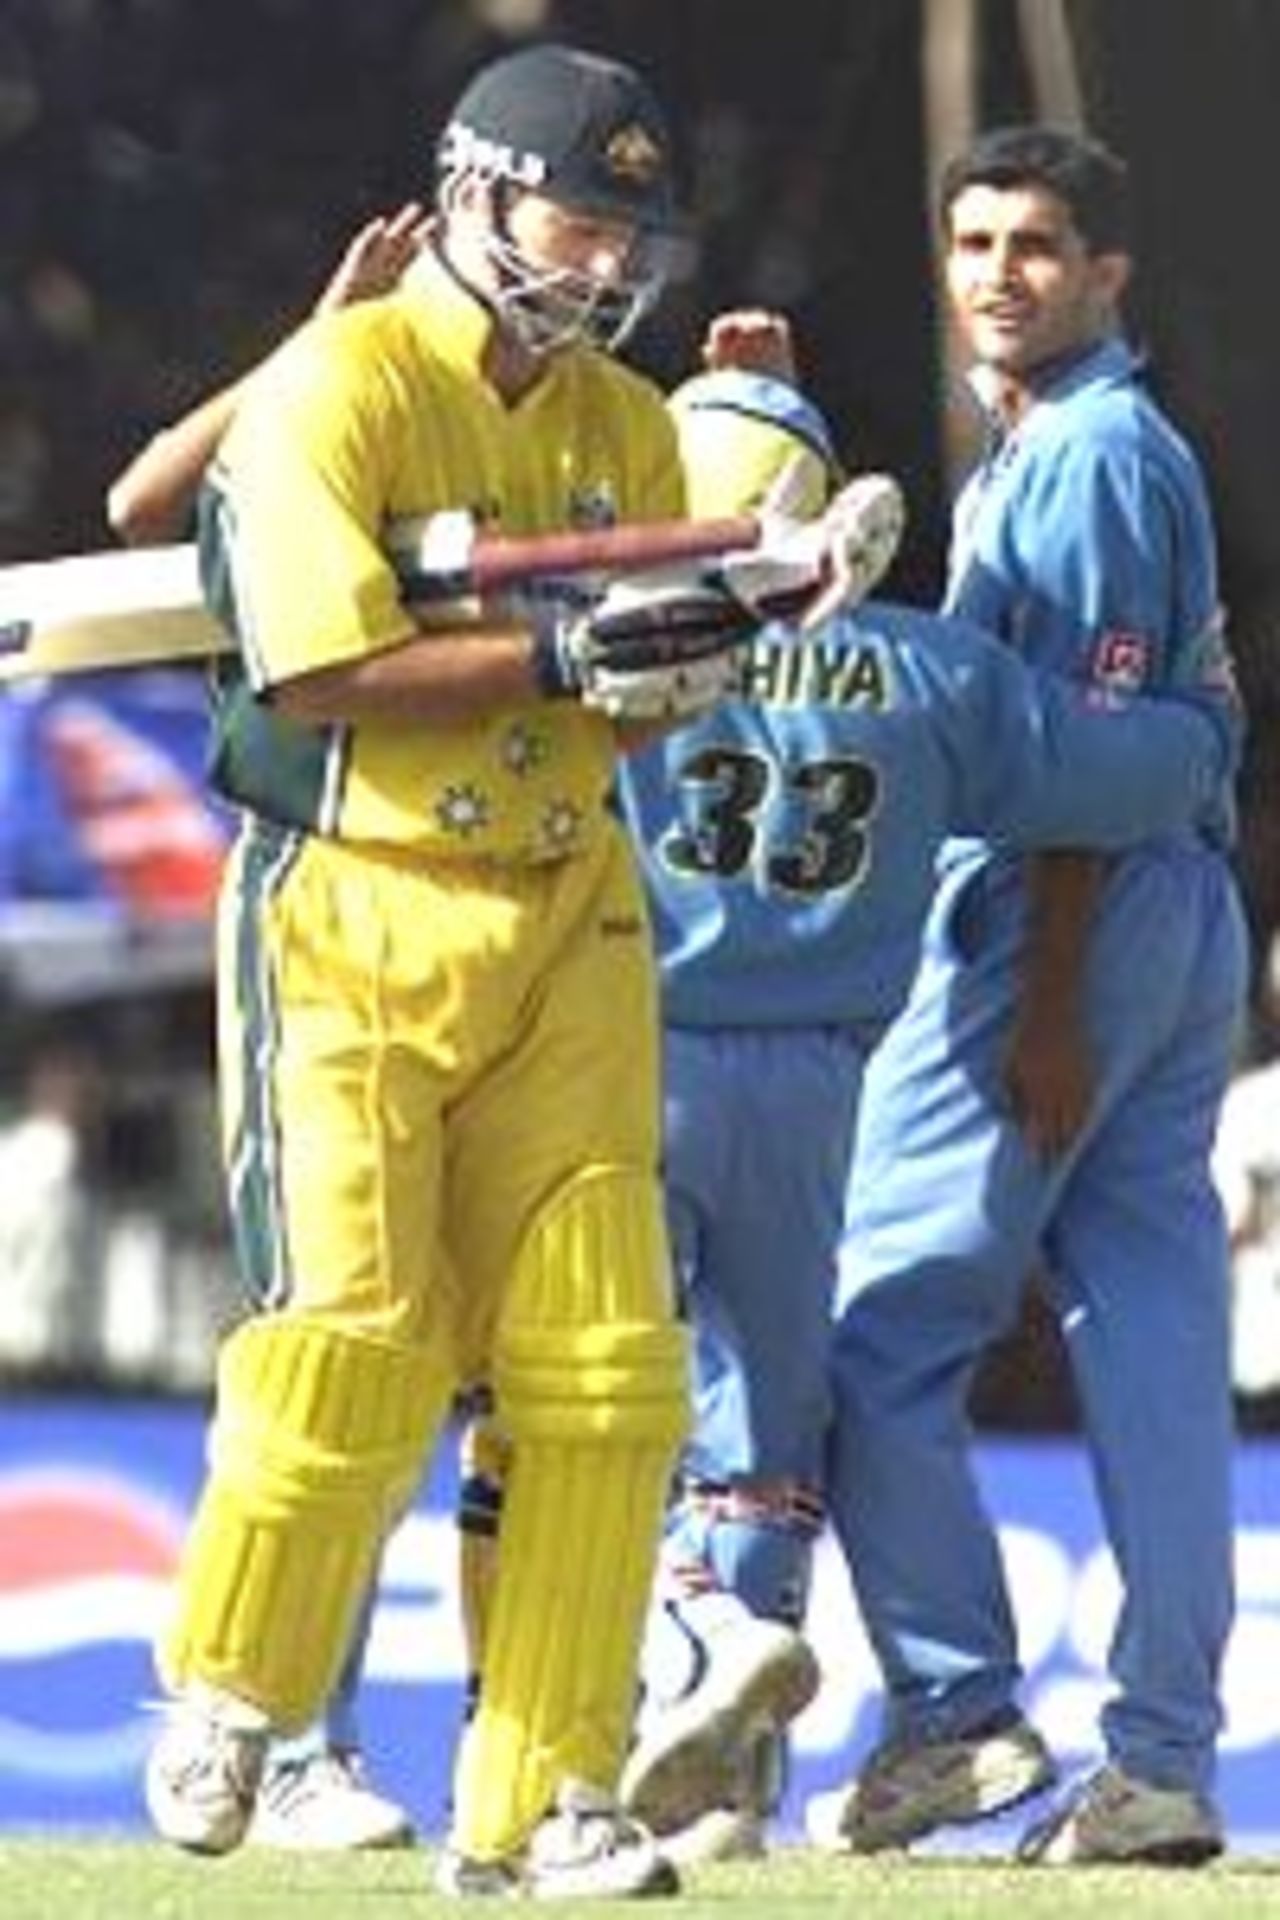 Saurav Ganguly (right) of India gives rival captain Steve Waugh of Australia (left) a send off after taking his wicket, during the 3rd One Day International between India and Australia, played at Nehru Stadium, Indore, India.